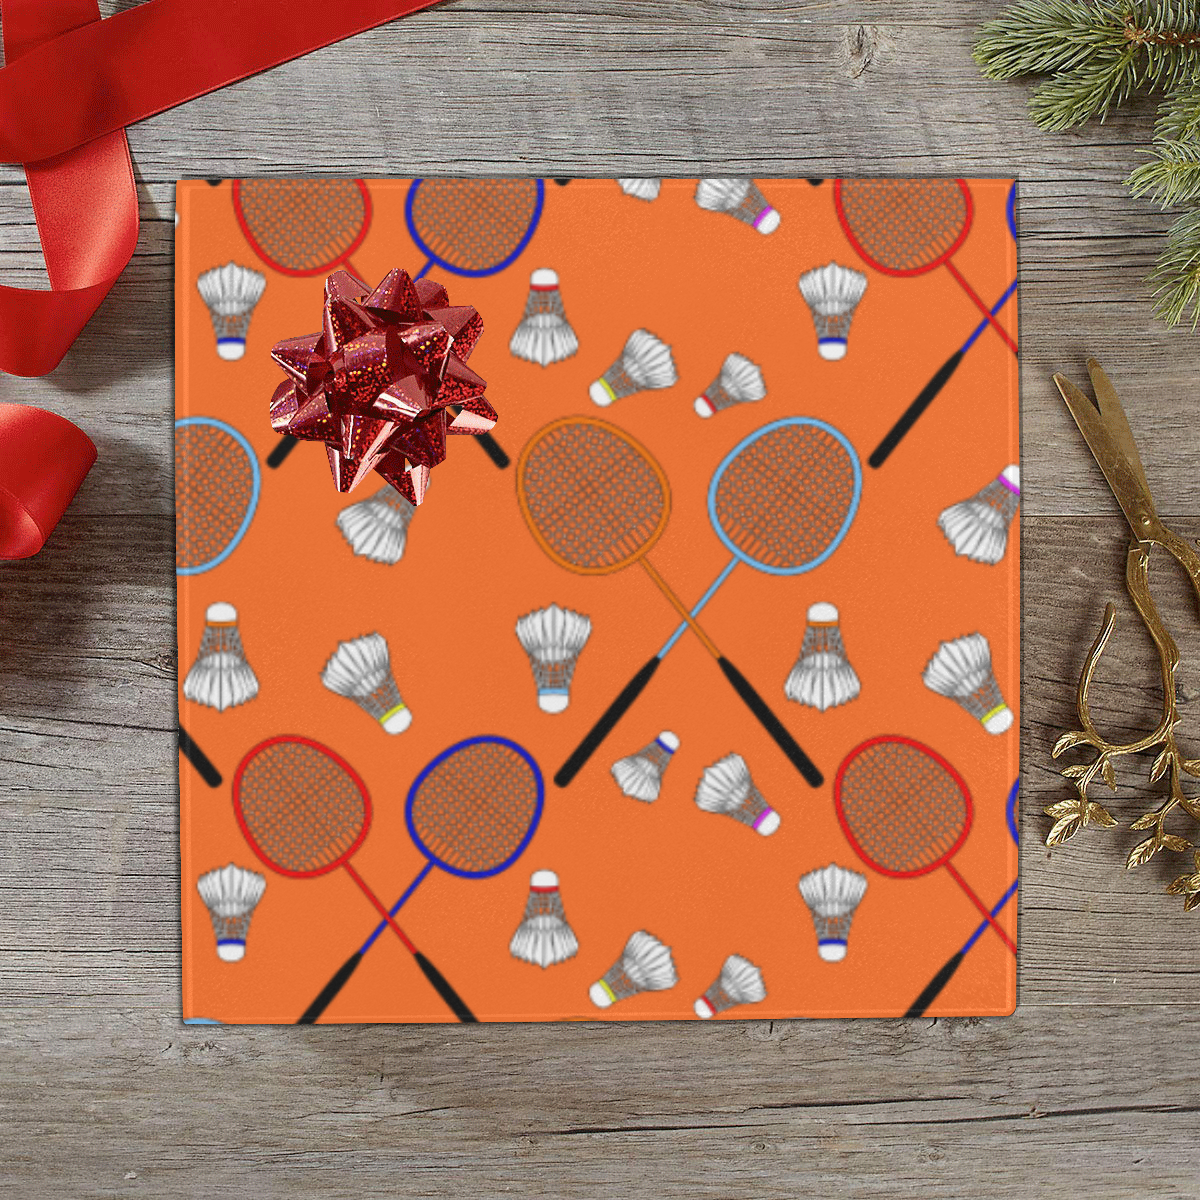 Badminton Rackets and Shuttlecocks Pattern Sports Orange Gift Wrapping Paper 58"x 23" (1 Roll)